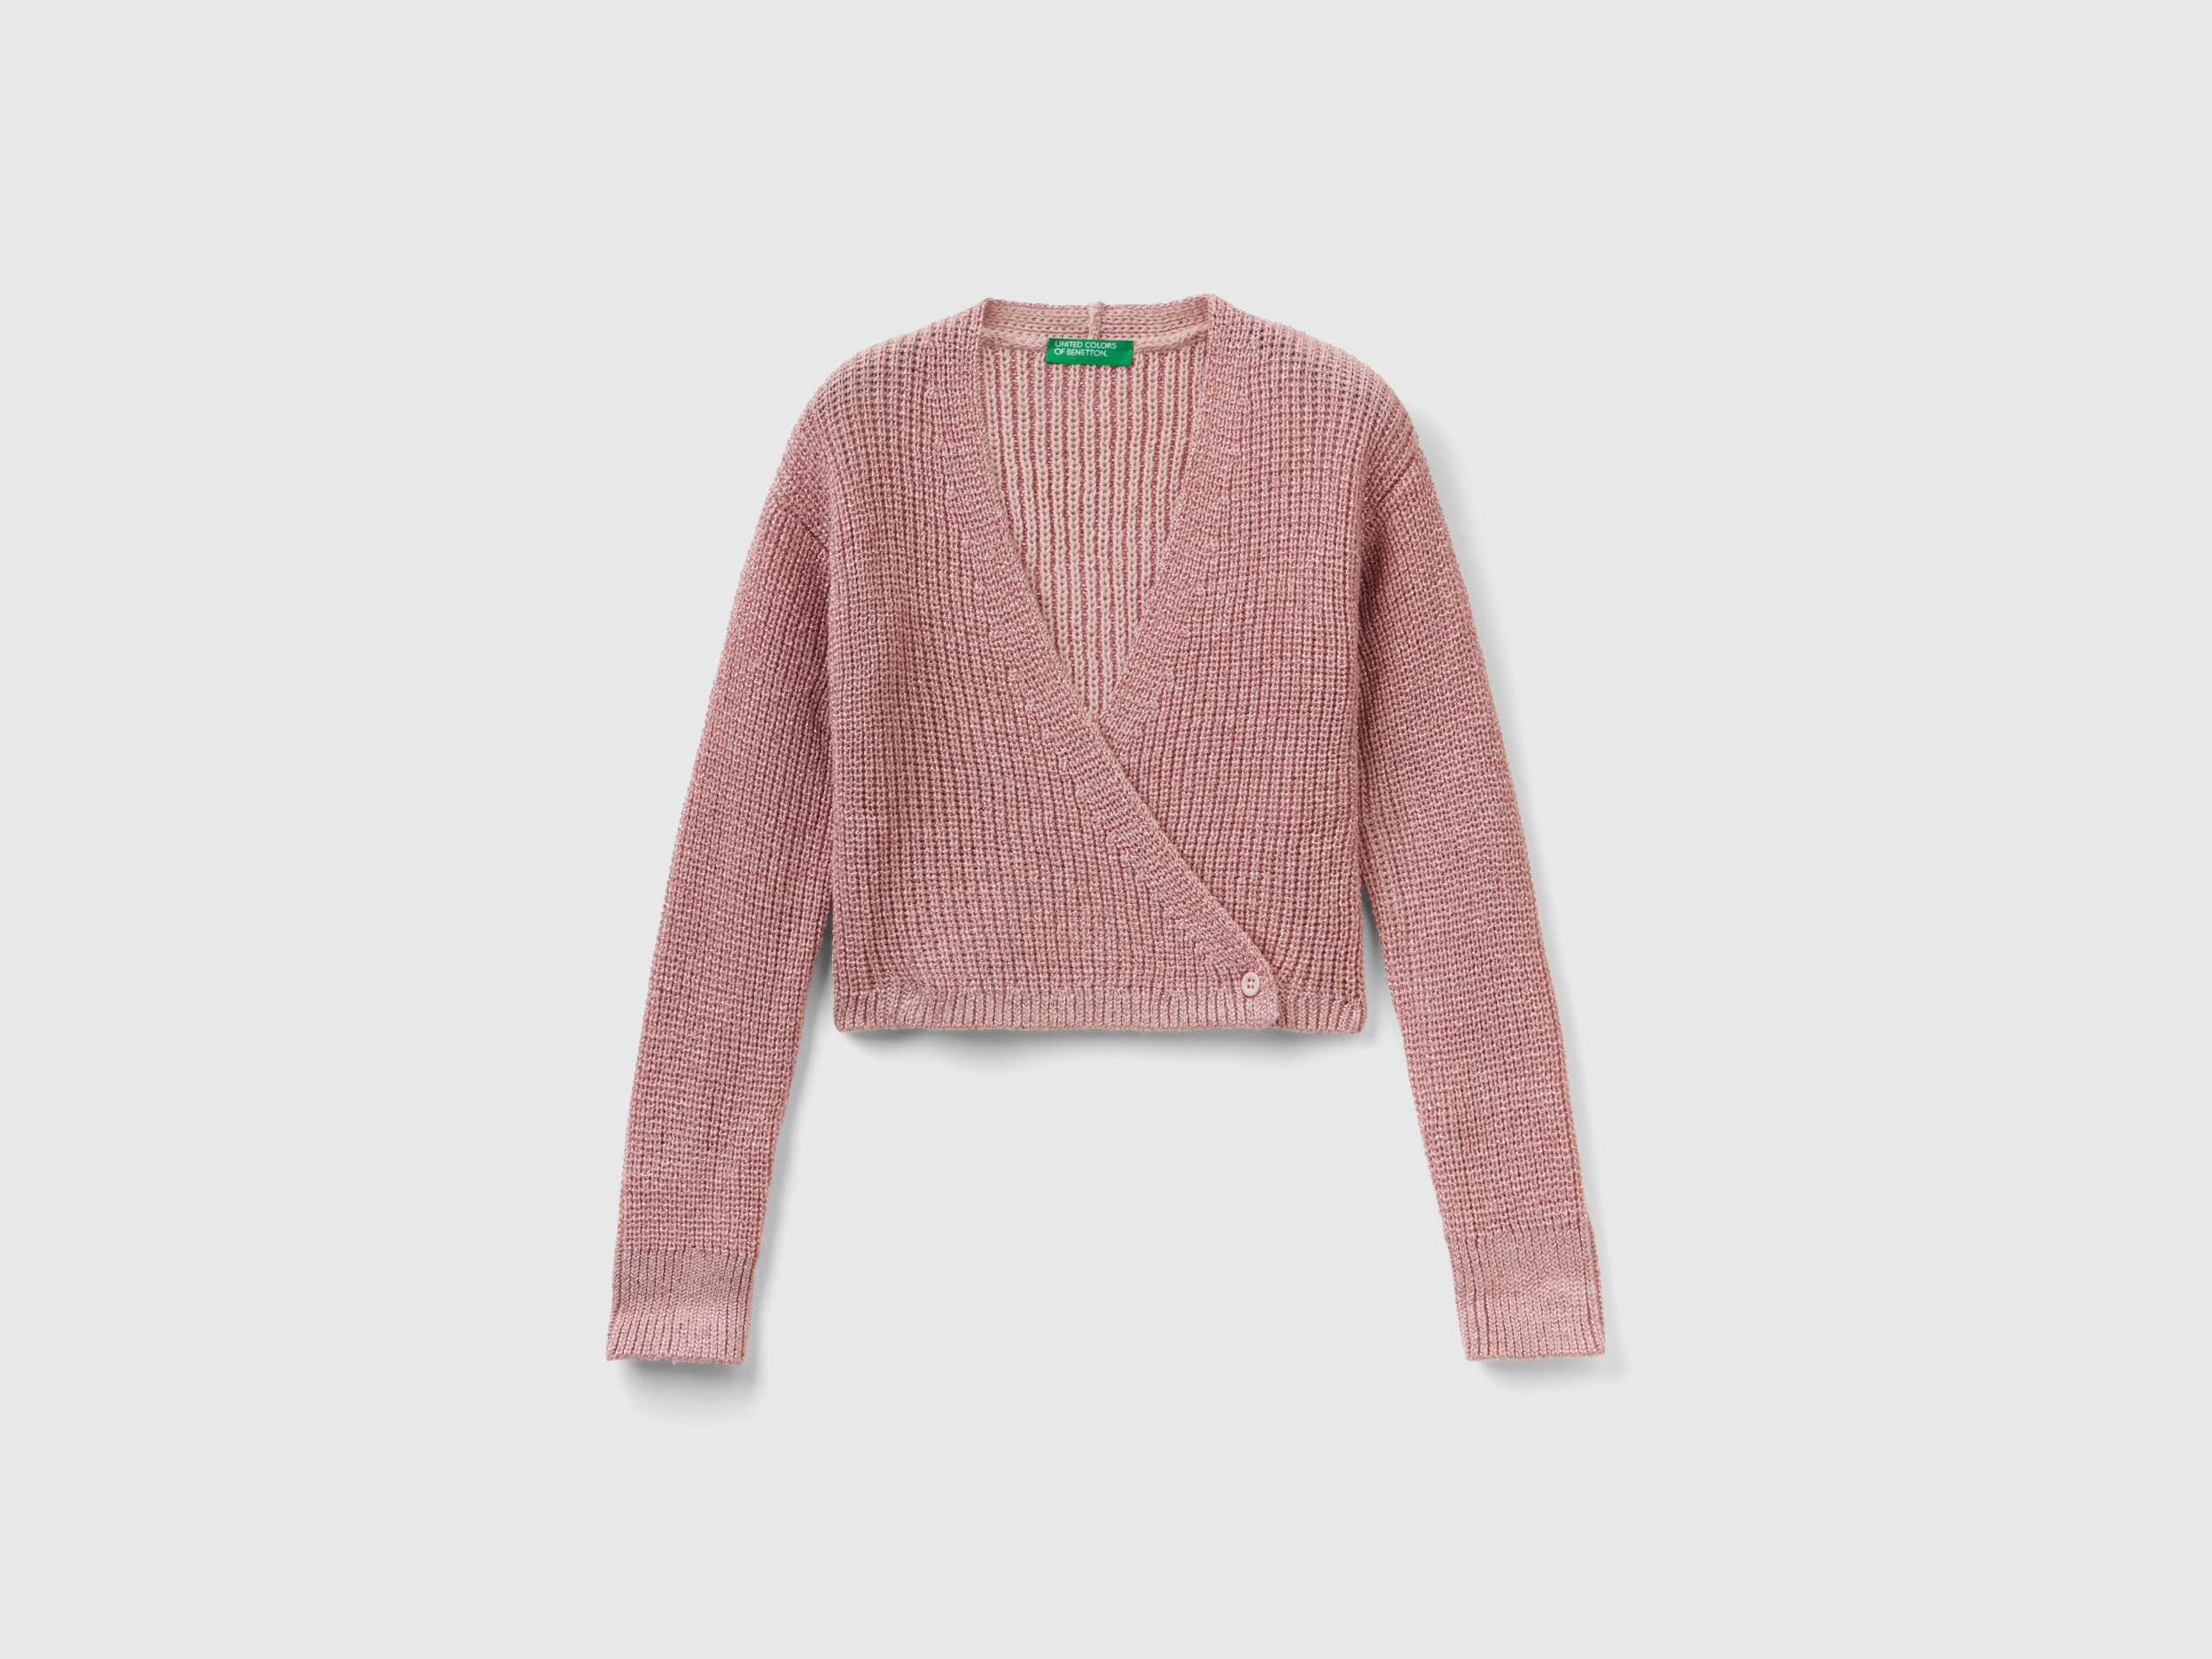 Benetton, Cropped Cardigan With Lurex, size L, Pink, Kids